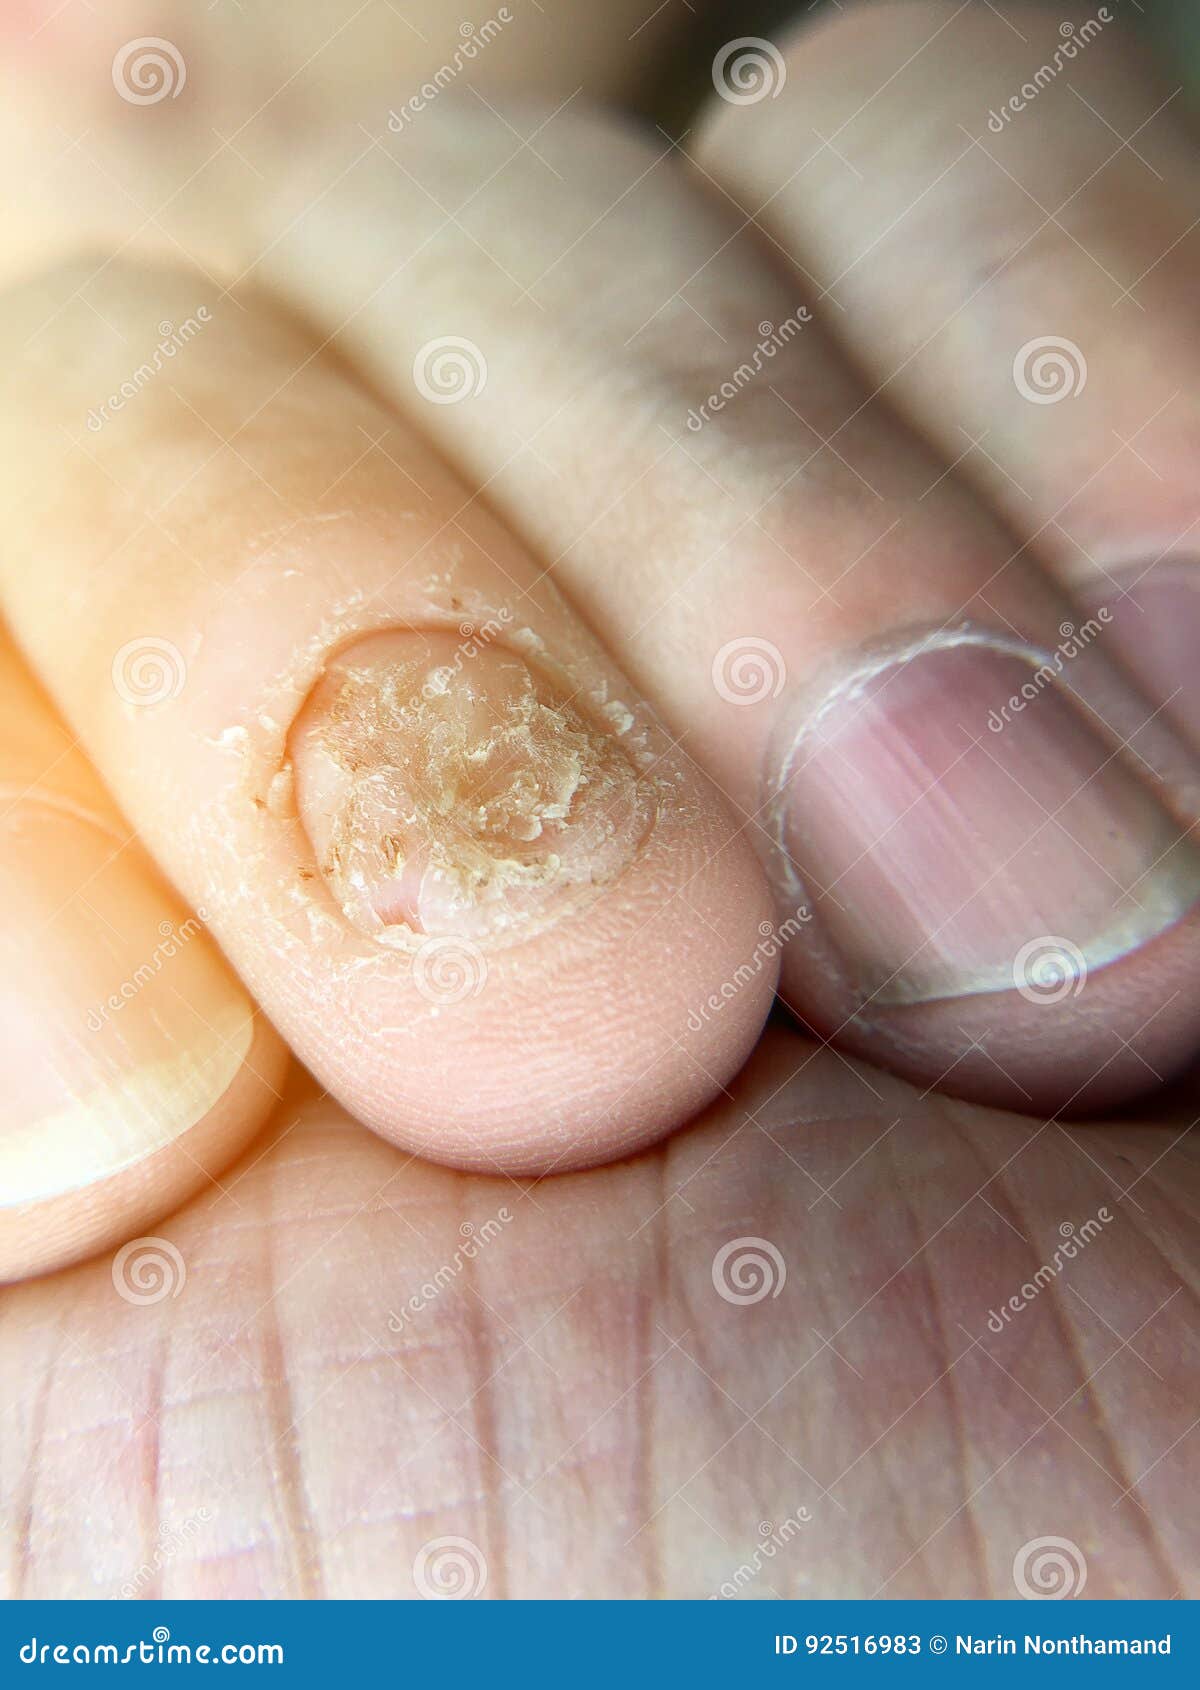 Illustration of a fungal nail infection showing human hand with  onychomycosis and close-up view of Trichopyton mentagrophytes fungi, one of  the causative agents of nail infections Stock Photo - Alamy